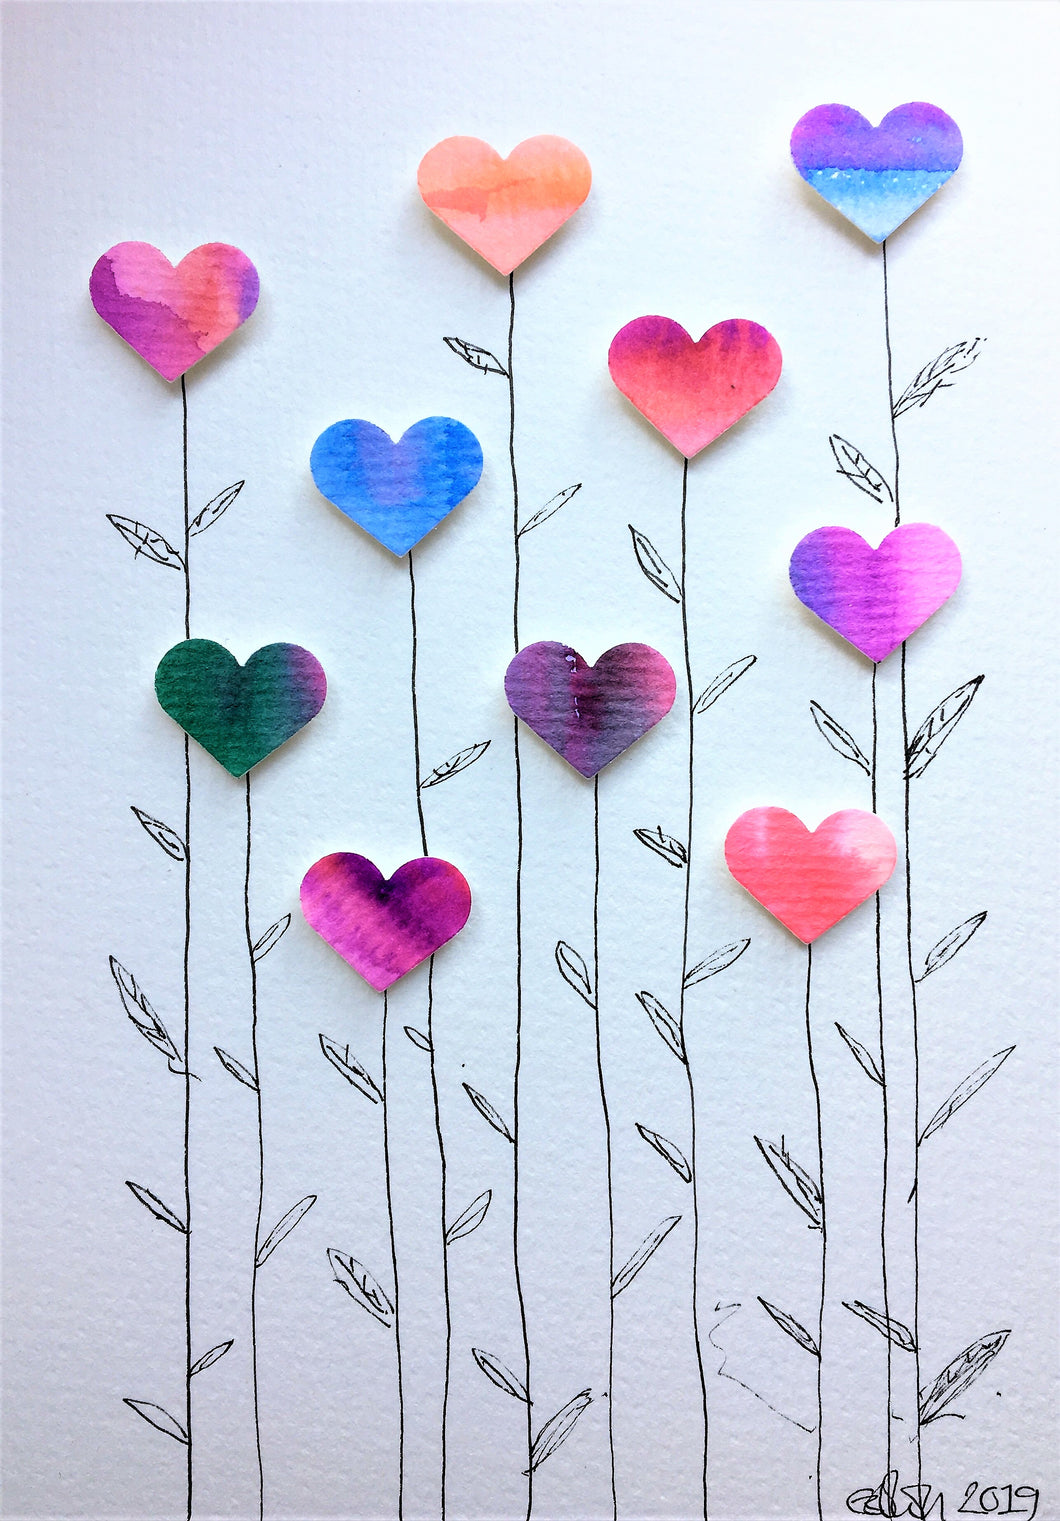 Handpainted Watercolour Greeting Card - Multicoloured Heart Flowers with Leaf Design - eDgE dEsiGn London